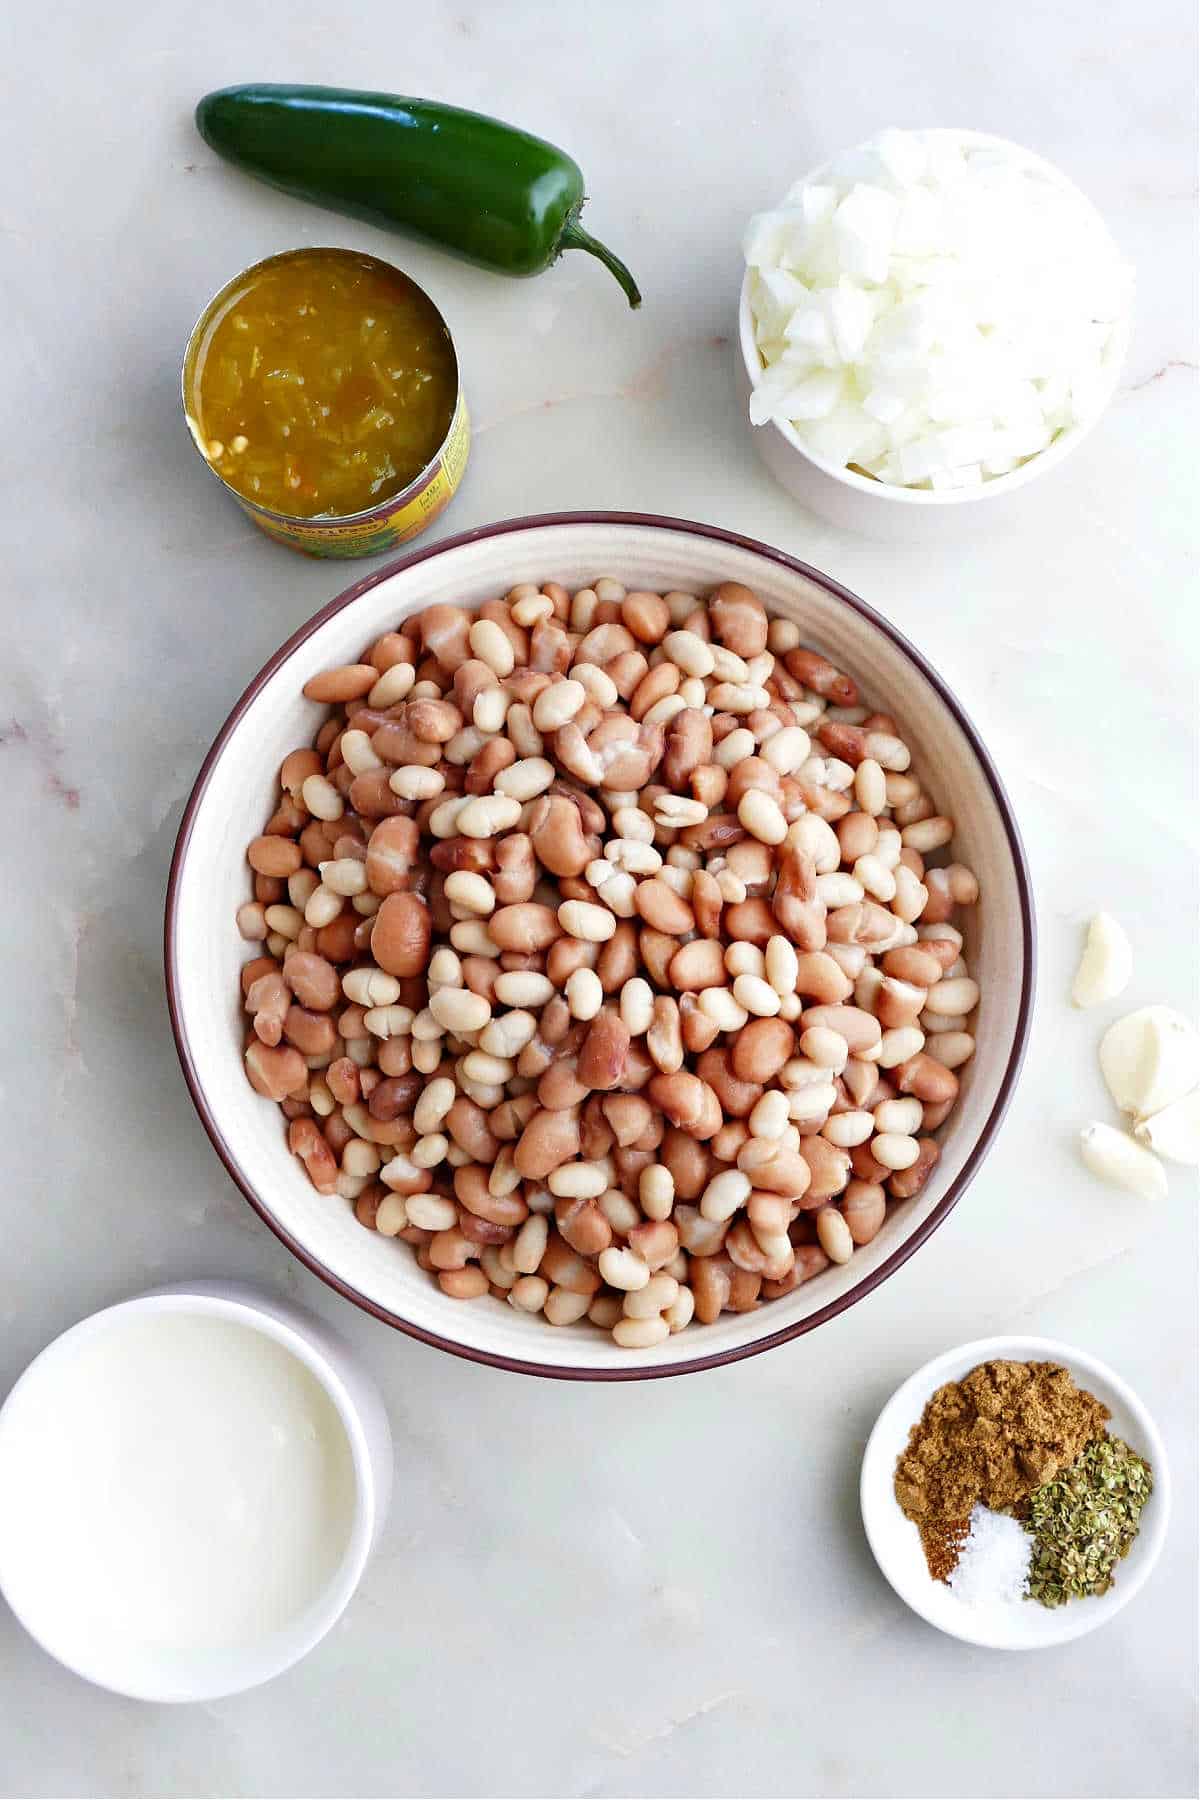 jalapeno, green chiles, onion, pinto and navy beans, sour cream, and spices on a counter